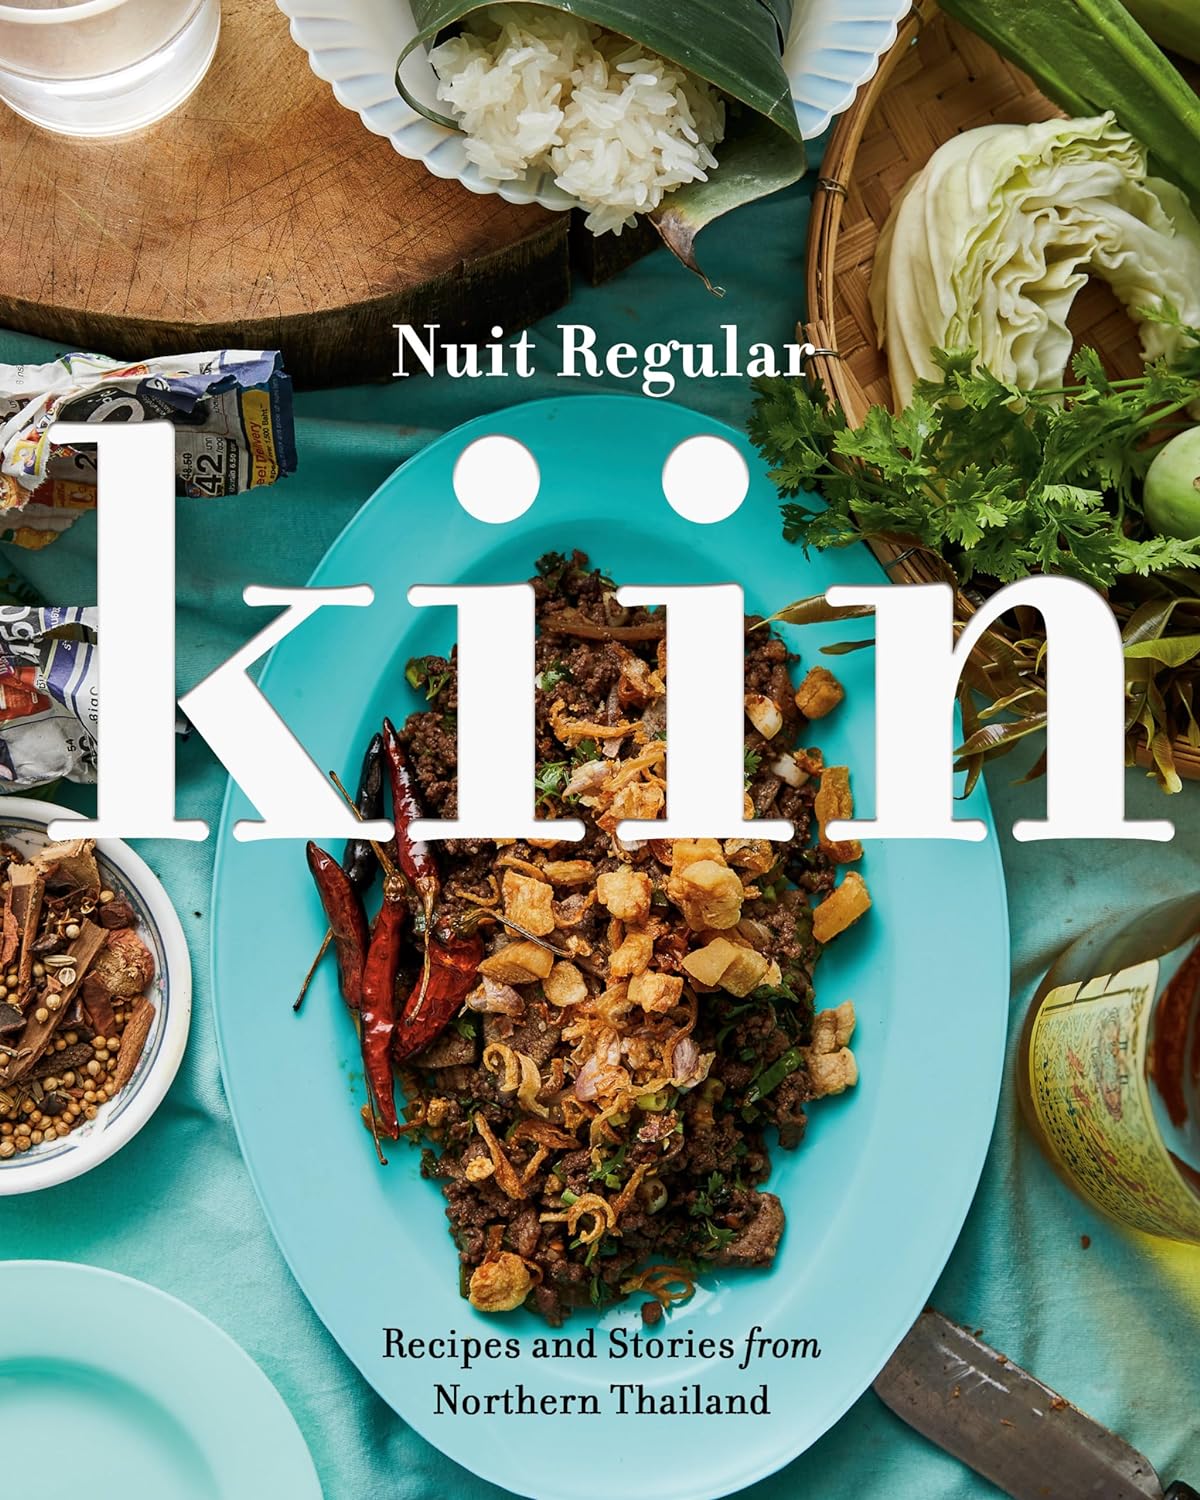 Kiin: Recipes and Stories from Northern Thailand (Nuit Regular)